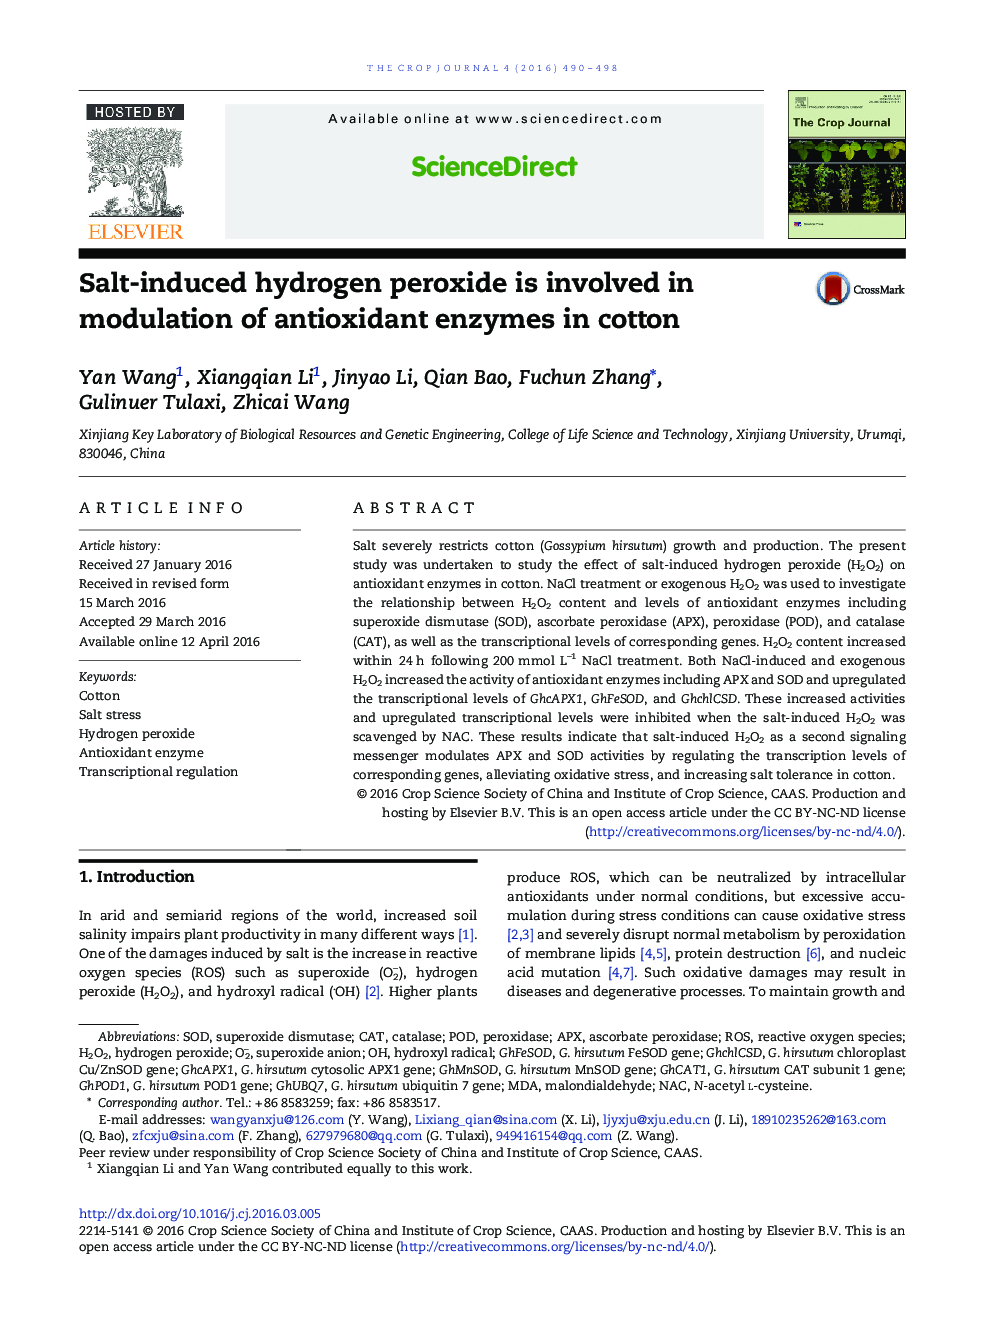 Salt-induced hydrogen peroxide is involved in modulation of antioxidant enzymes in cotton